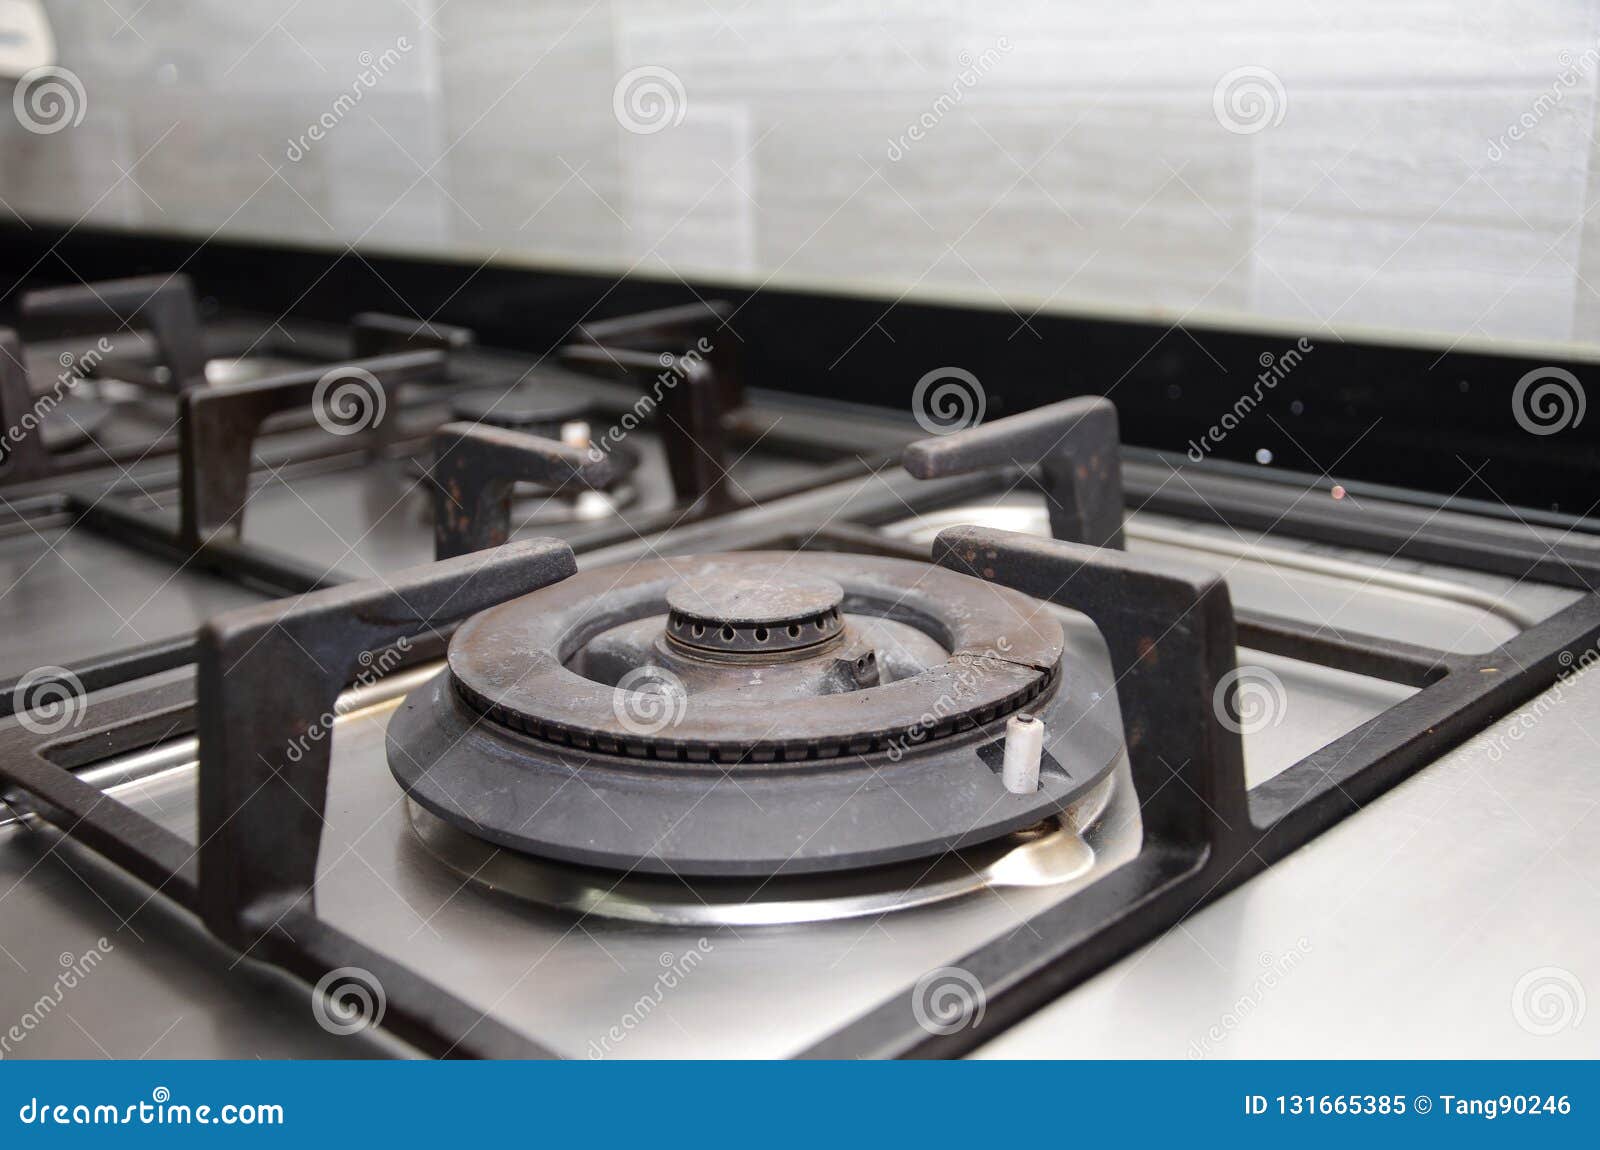 Gas Stove On Countertop In Contemporary Home Kitchen Stock Image